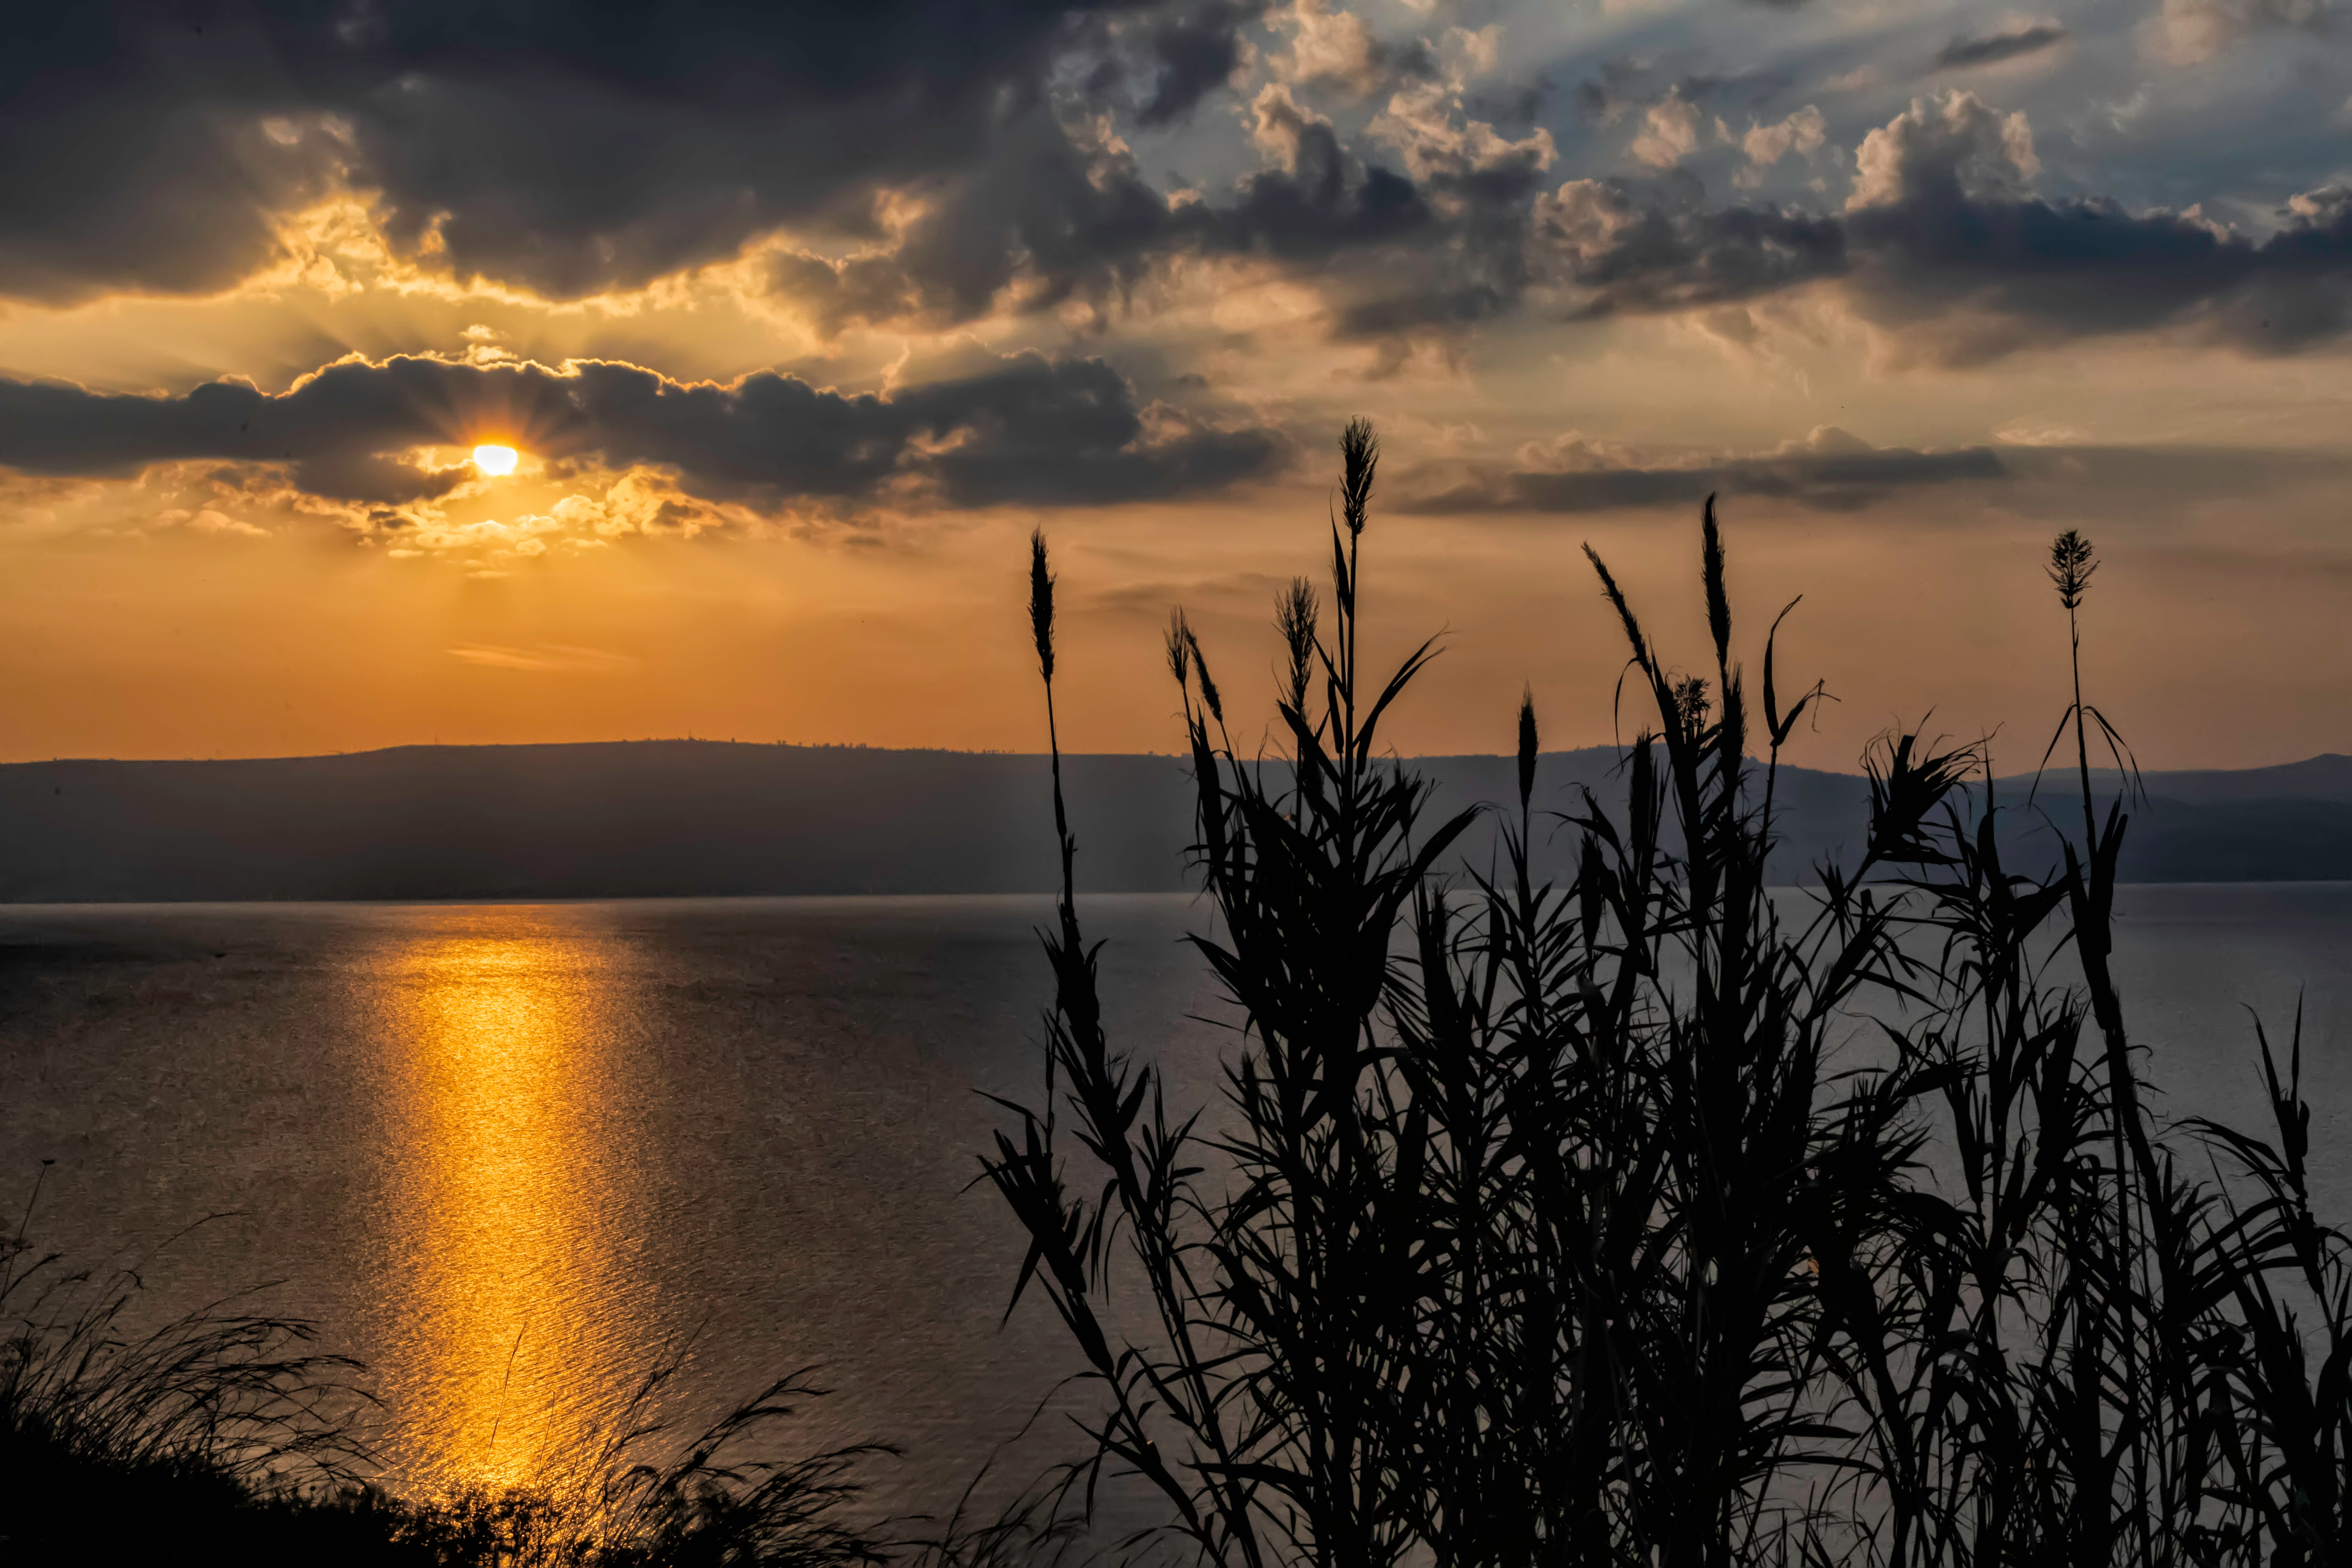 Sunset over the sea of Galilee